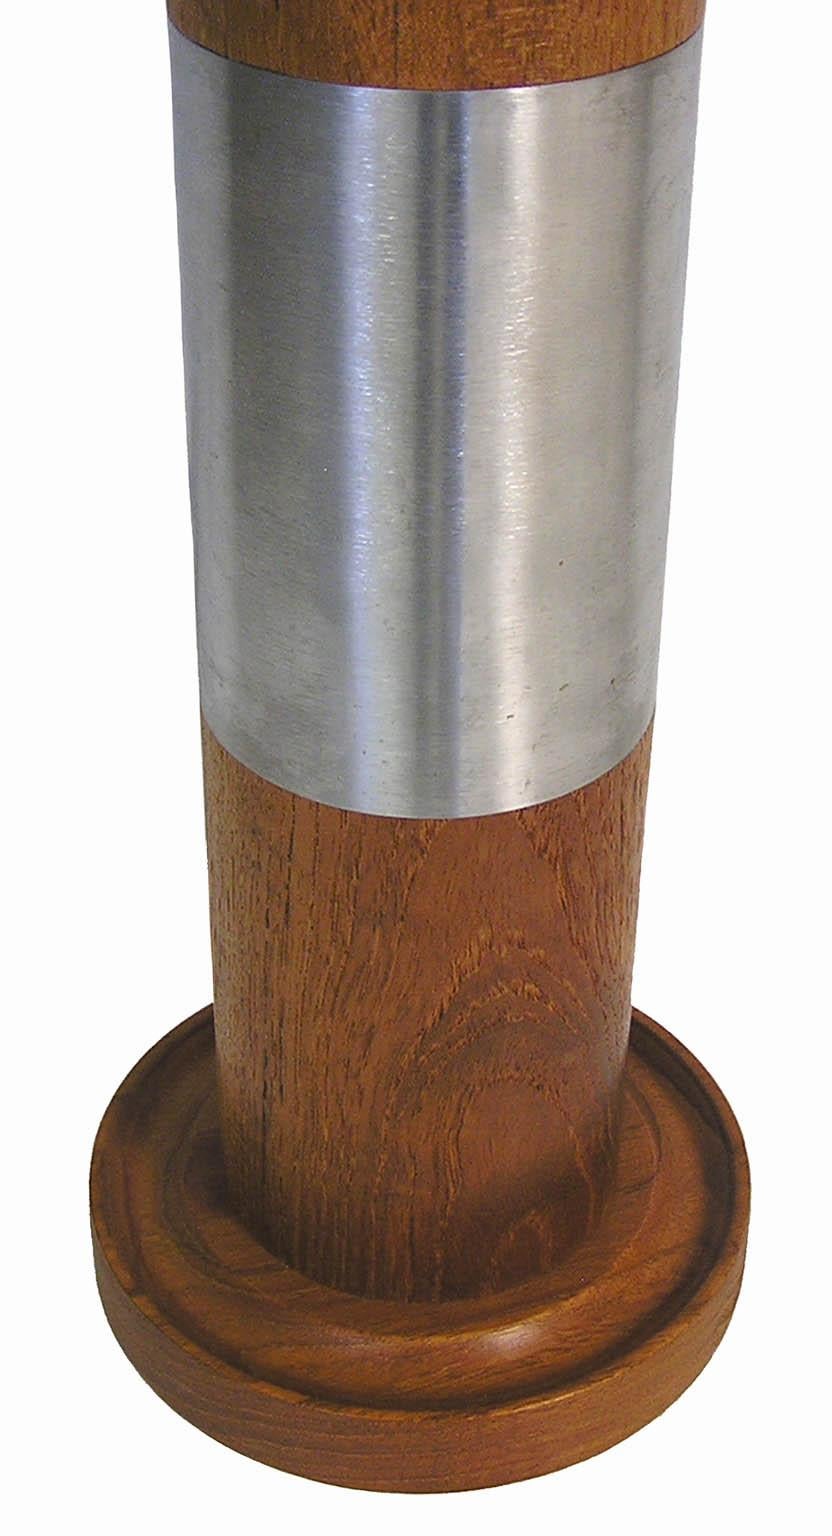 1960s Solid Teak Cylindrical Table Lamp with Brushed Steel Band In Excellent Condition For Sale In Winnipeg, Manitoba